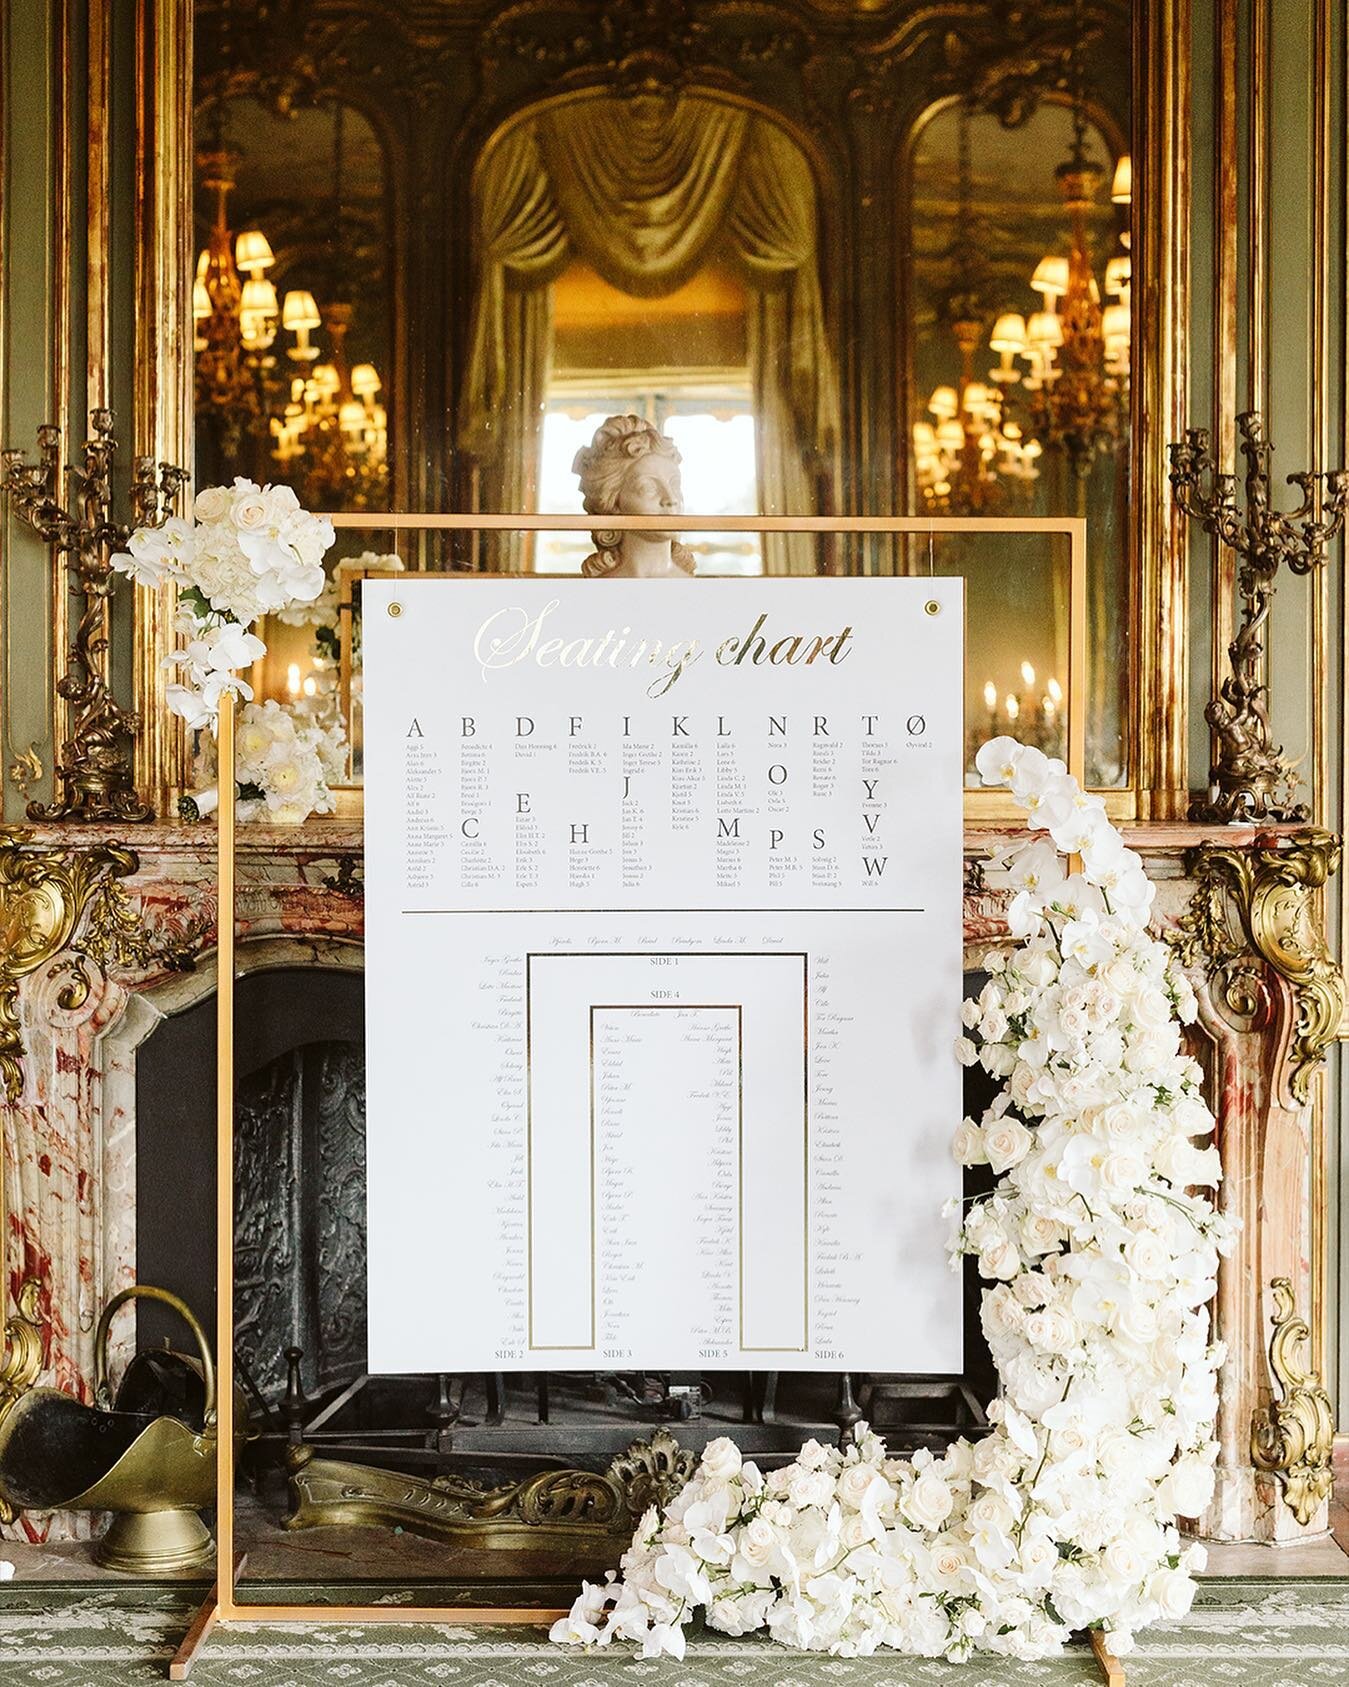 Love the white and gold details⭐️ Seating chart and stunning flowers by @wildaboutflower 🌸

Location: @Clivedenhouse
Photographer @moment_studio
Gorgeous flowers by @wildaboutflower
Wedding planner and designer: GLENNE Luxury Weddings &amp; Events
.